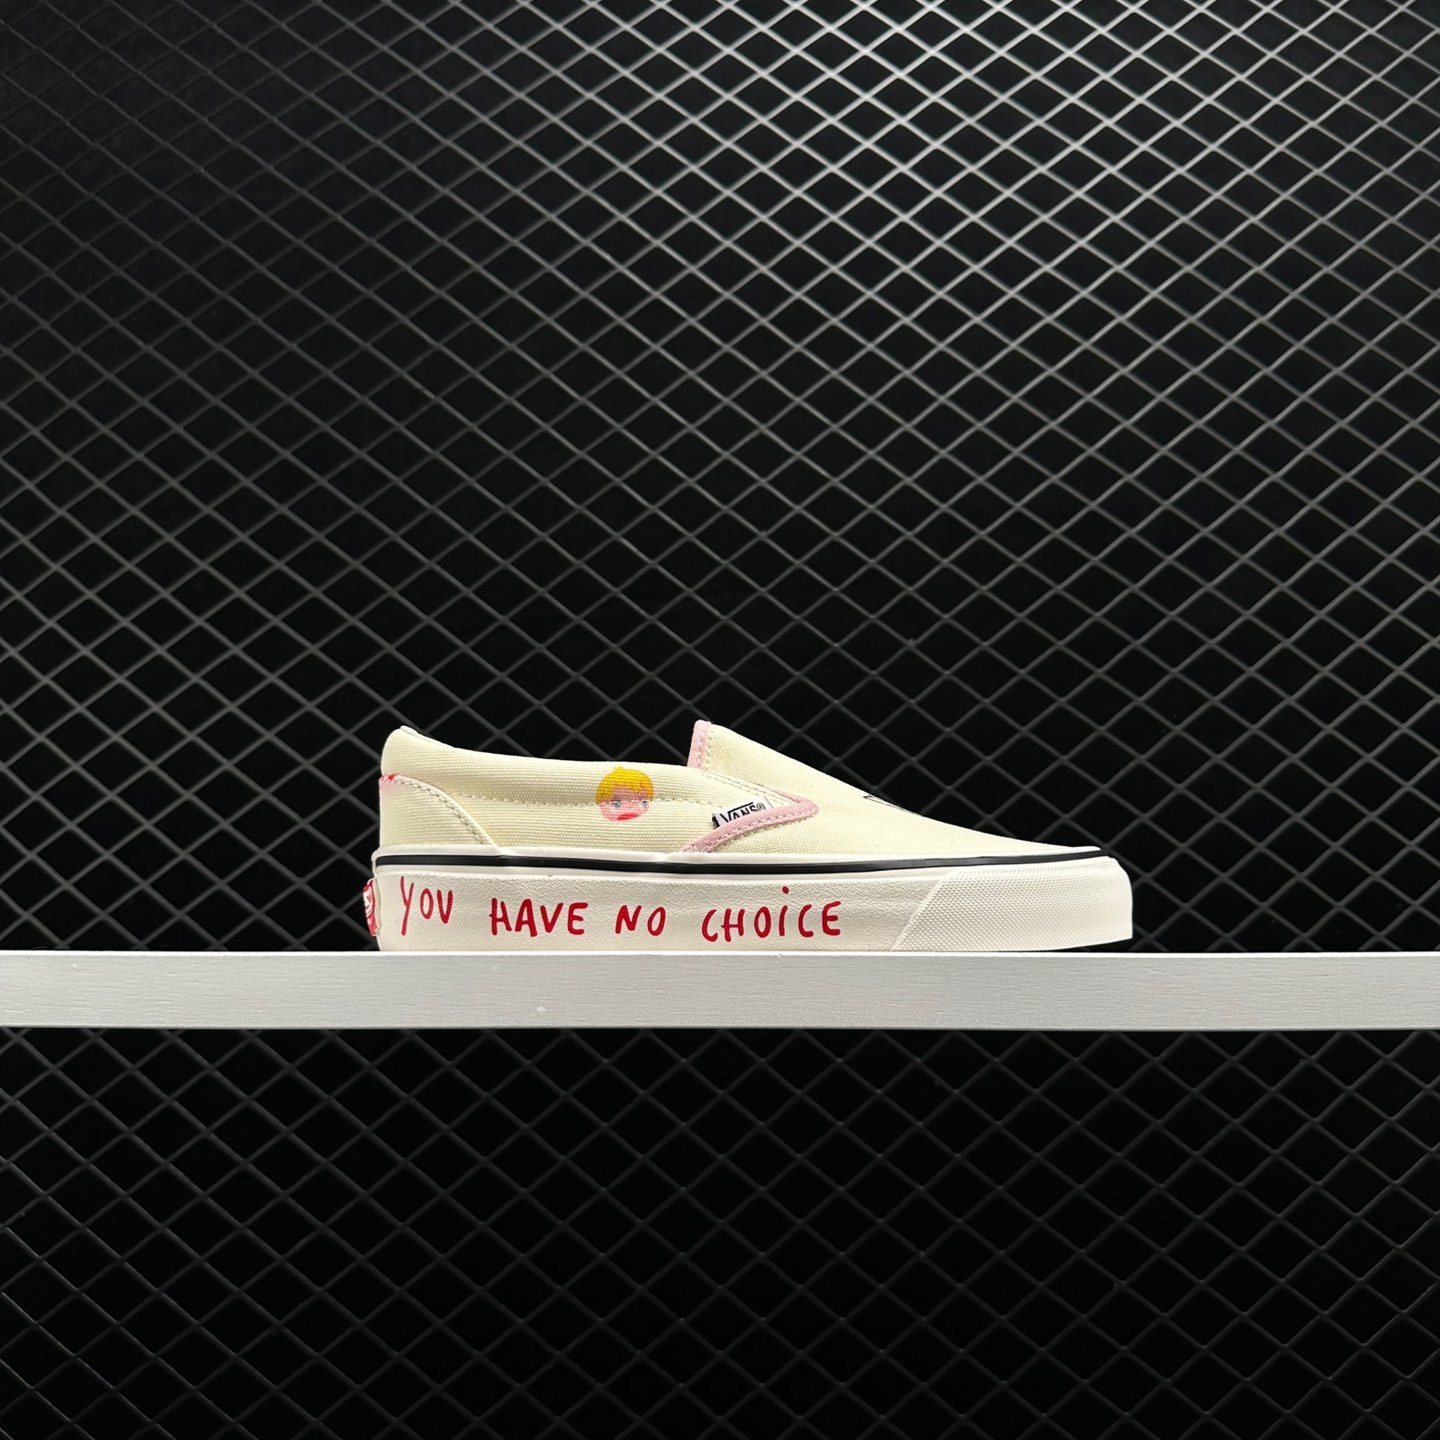 Javier Calleja x Vans Unisex Vault OG Authentic LX Sneakers White – Limited Edition Collab!